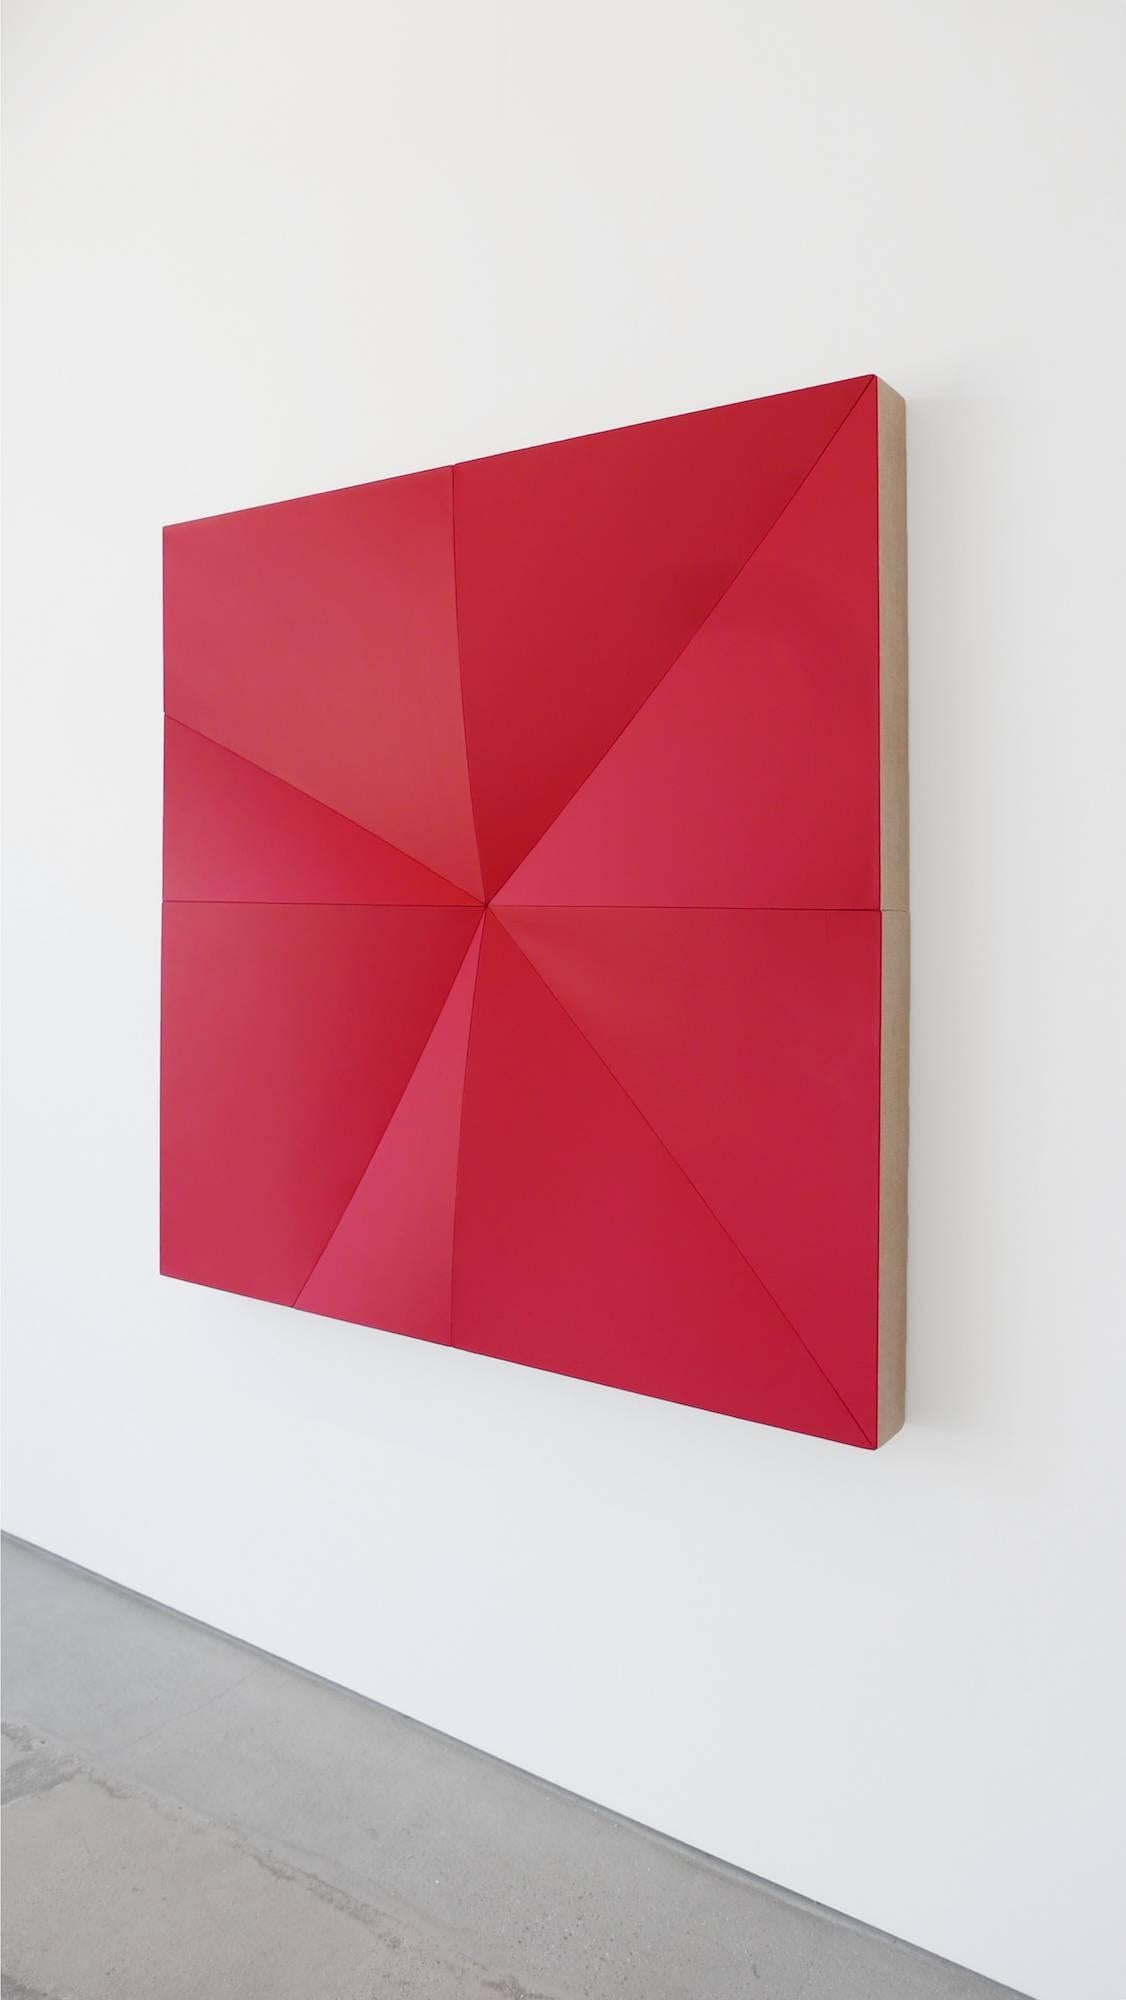 Based on the premise formulated by De Stijl cofounder (and fellow Dutchman) Theo van Doesburg that a work of art refers only to itself, Jan Maarten Voskuil’s abstract, wonkily geometric paintings-cum-sculptures are full of rigor and humor. His works